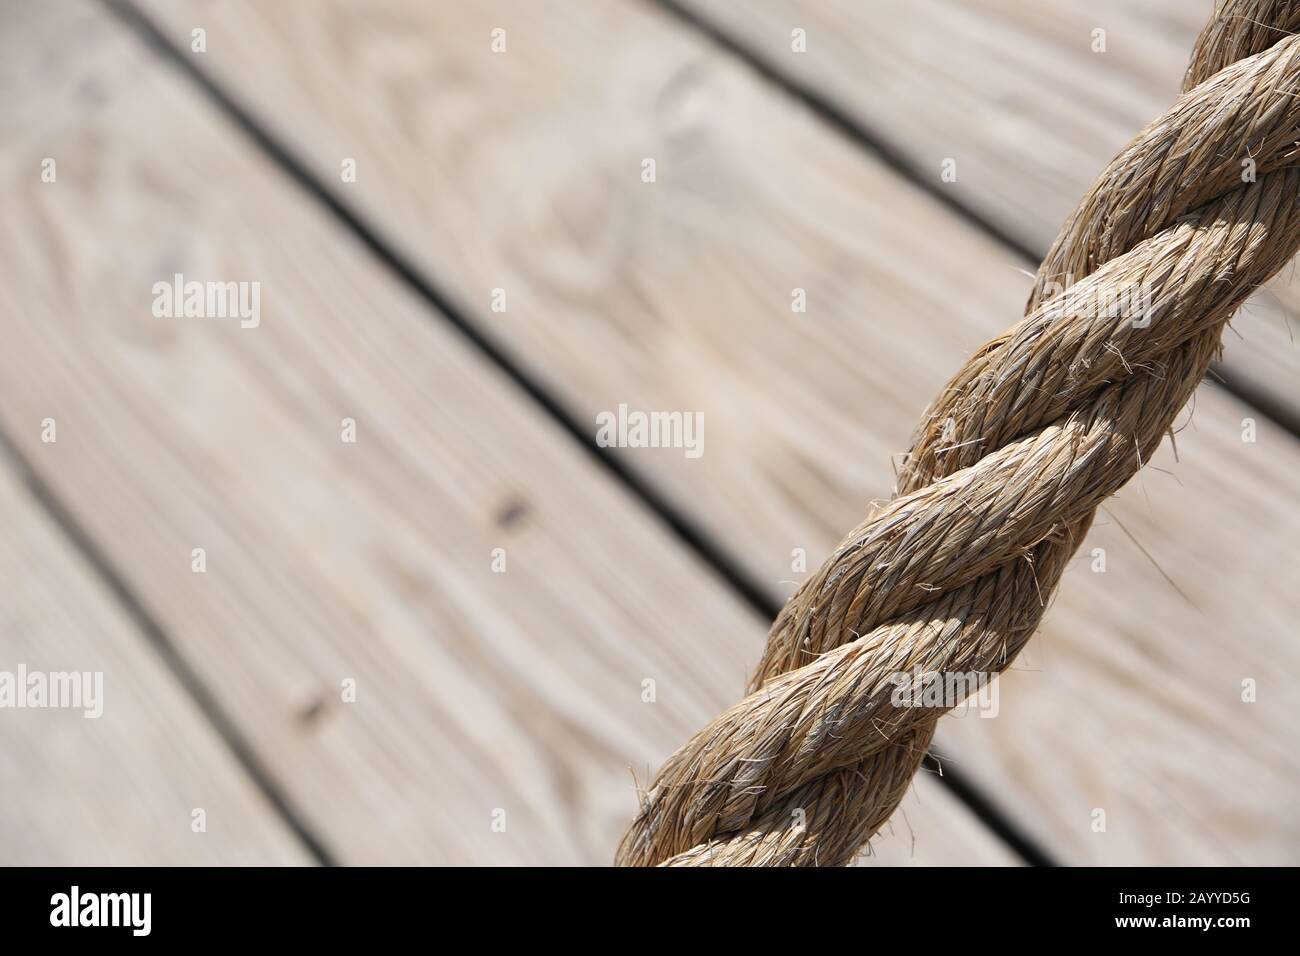 Aged rope with wooden floor boards in the background creating a natural aged texture for use as a background. Stock Photo